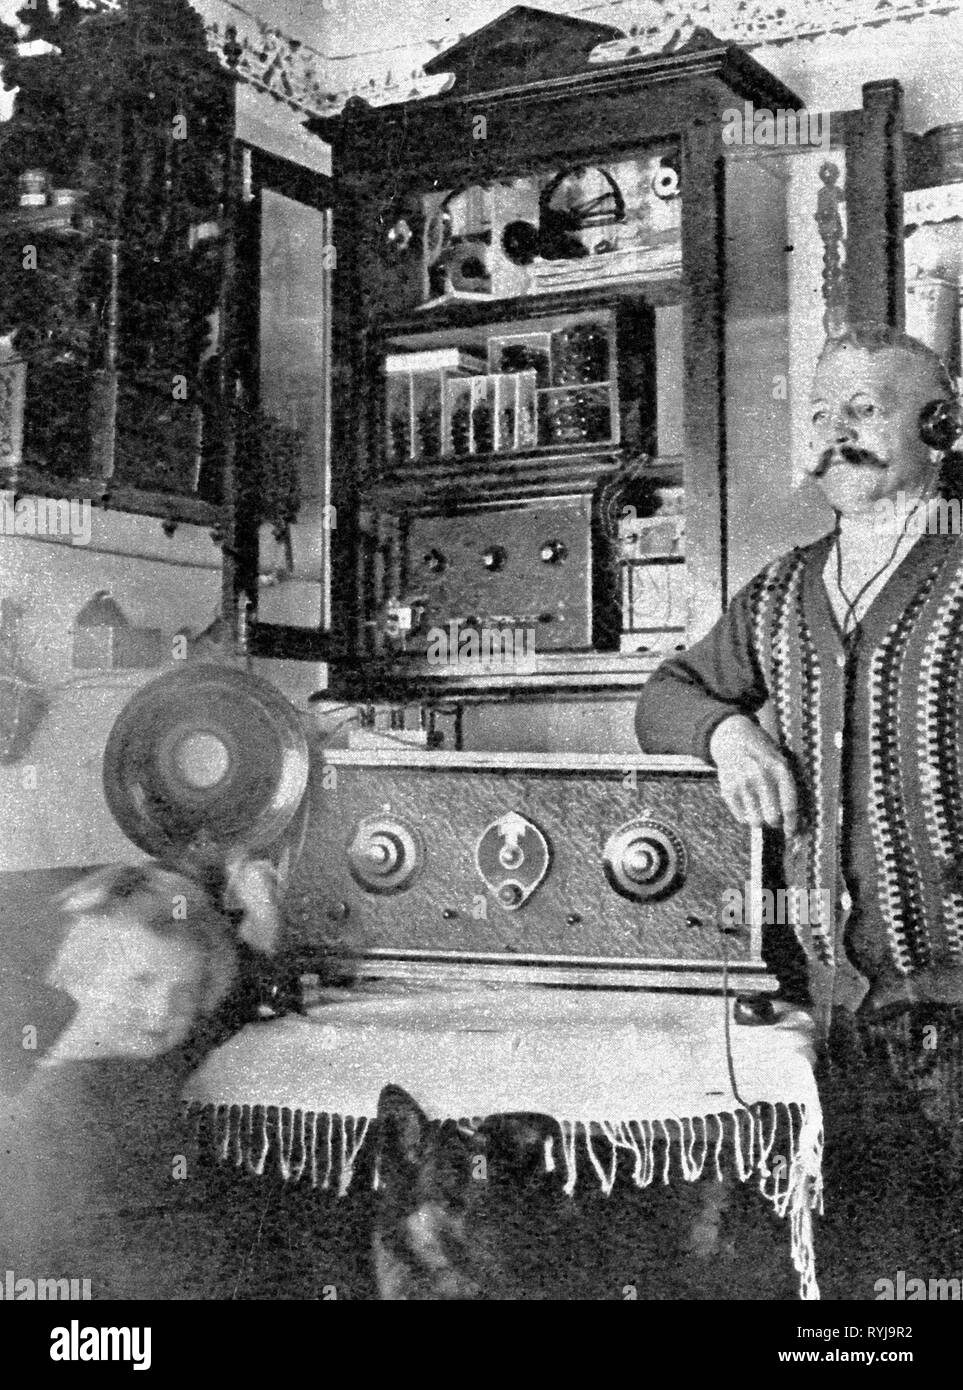 Broadcast, radio, apparecchi radio, self-made radio set, Germania, 1929, Additional-Rights-Clearance-Info-Not-Available Foto Stock